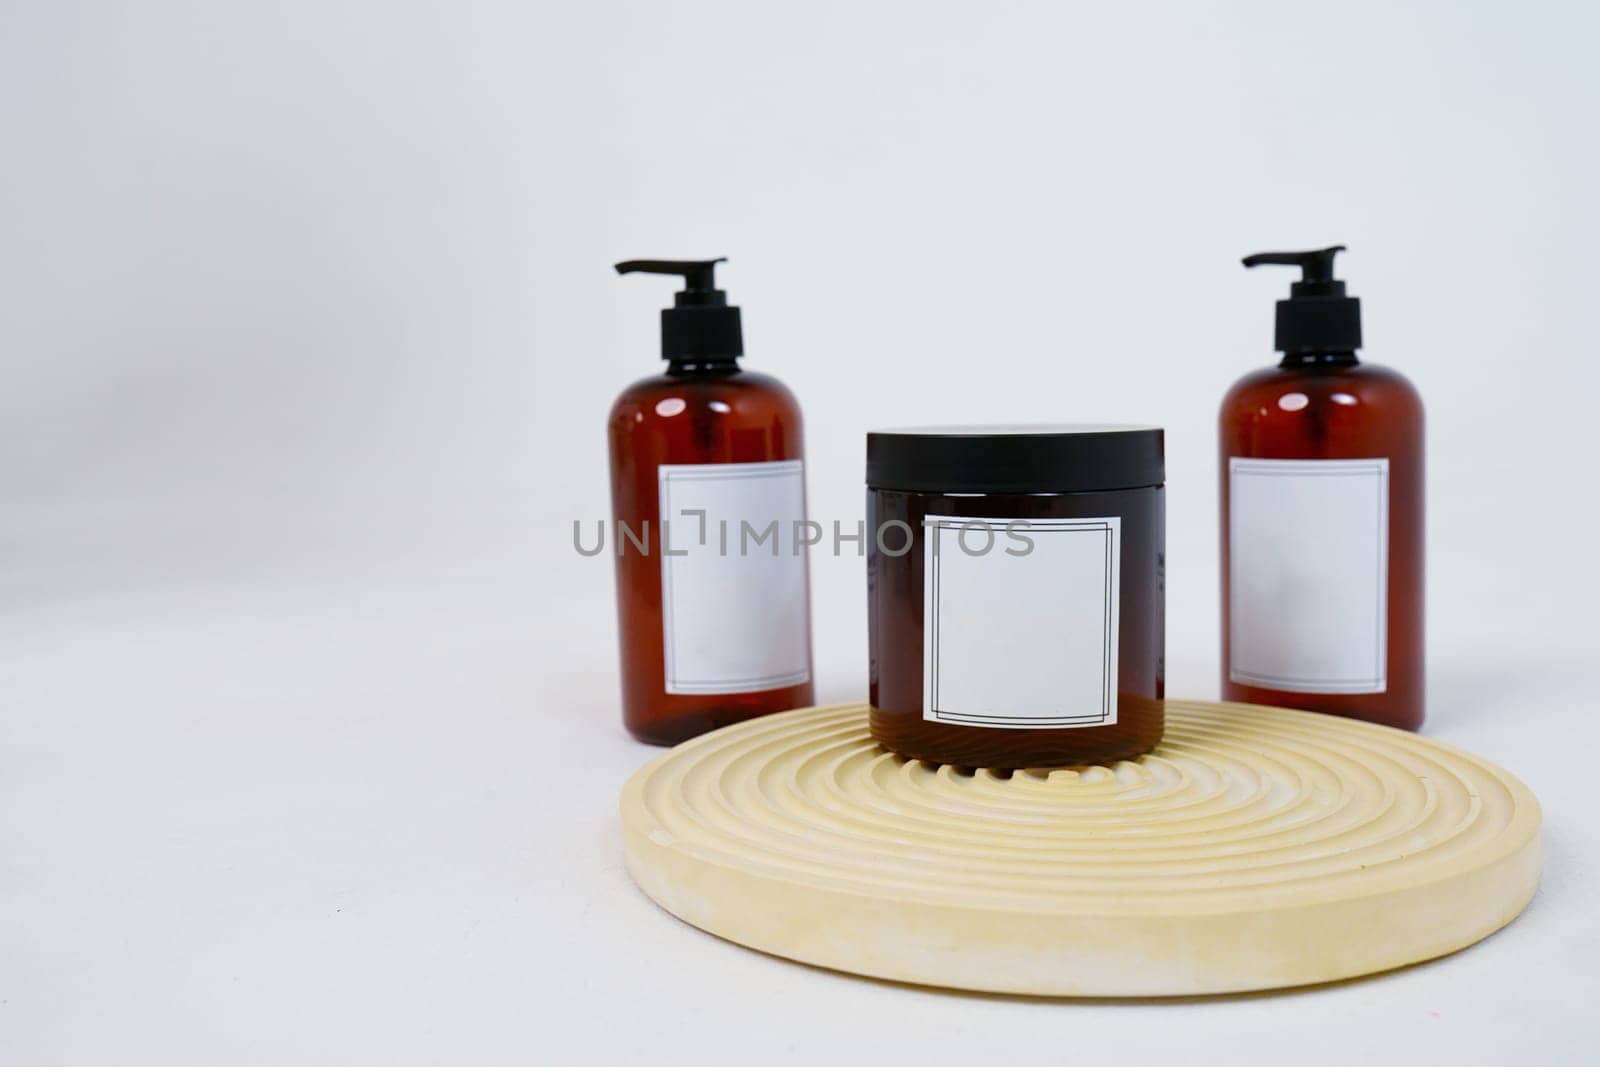 Body care. two bottles with a dispenser and a jar of body cream on a geometric stand on a light gray background. Advertising concept by tewolf